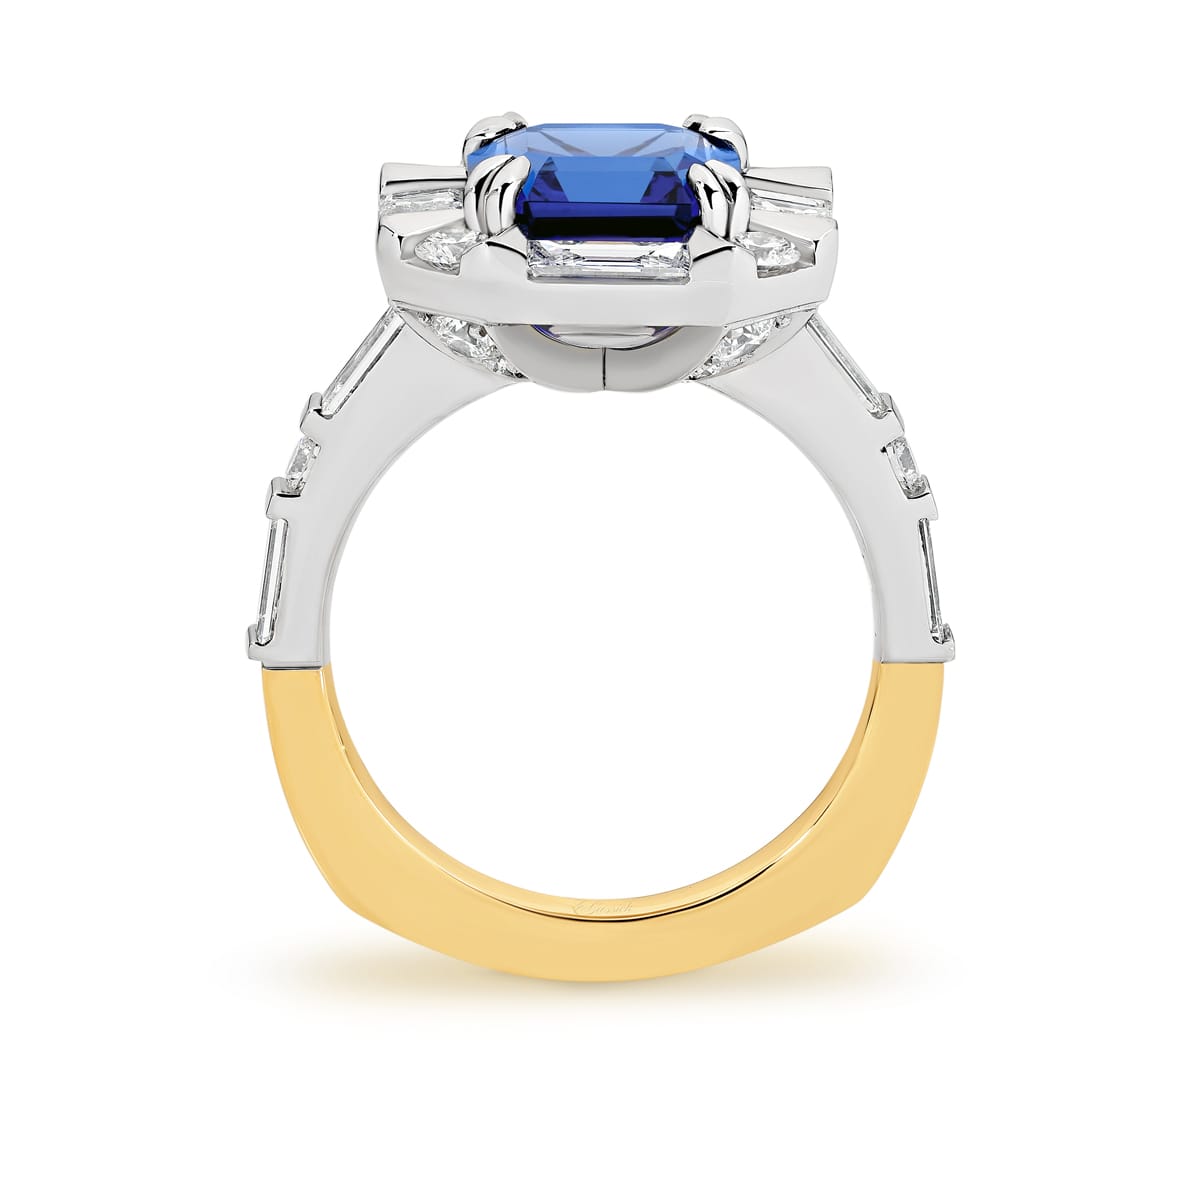 Zarriah features a 3.17ct Asscher cut tanzanite surrounded by a halo of baguette and round brilliant cut diamonds. Her centre stone is set in a double corner claws and her shoulders feature baguettes and round brilliant cut diamonds. Handcrafted to perfection in 18 carat yellow and white gold, she was designed and handcrafted by LeGassick's Master Jewellers, Gold Coast, Australia.